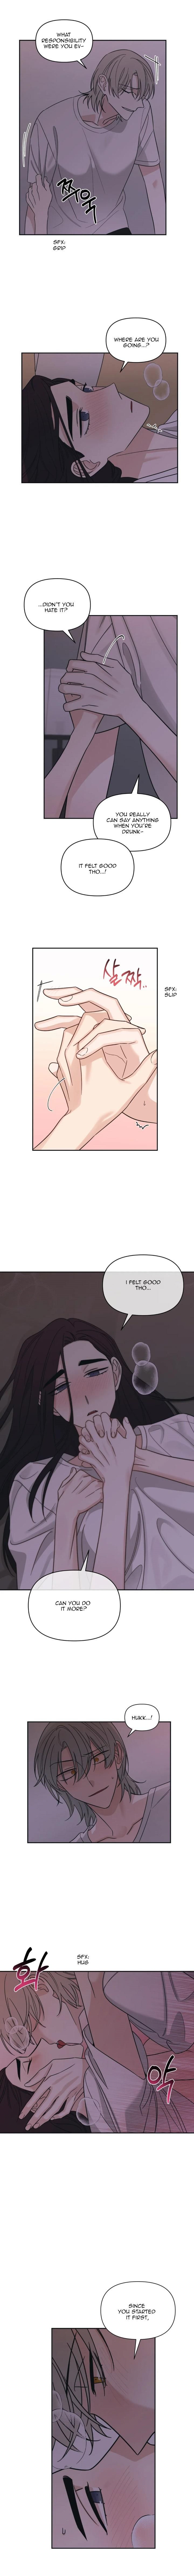 Get Out Of My House! Chapter 11 - Page 6